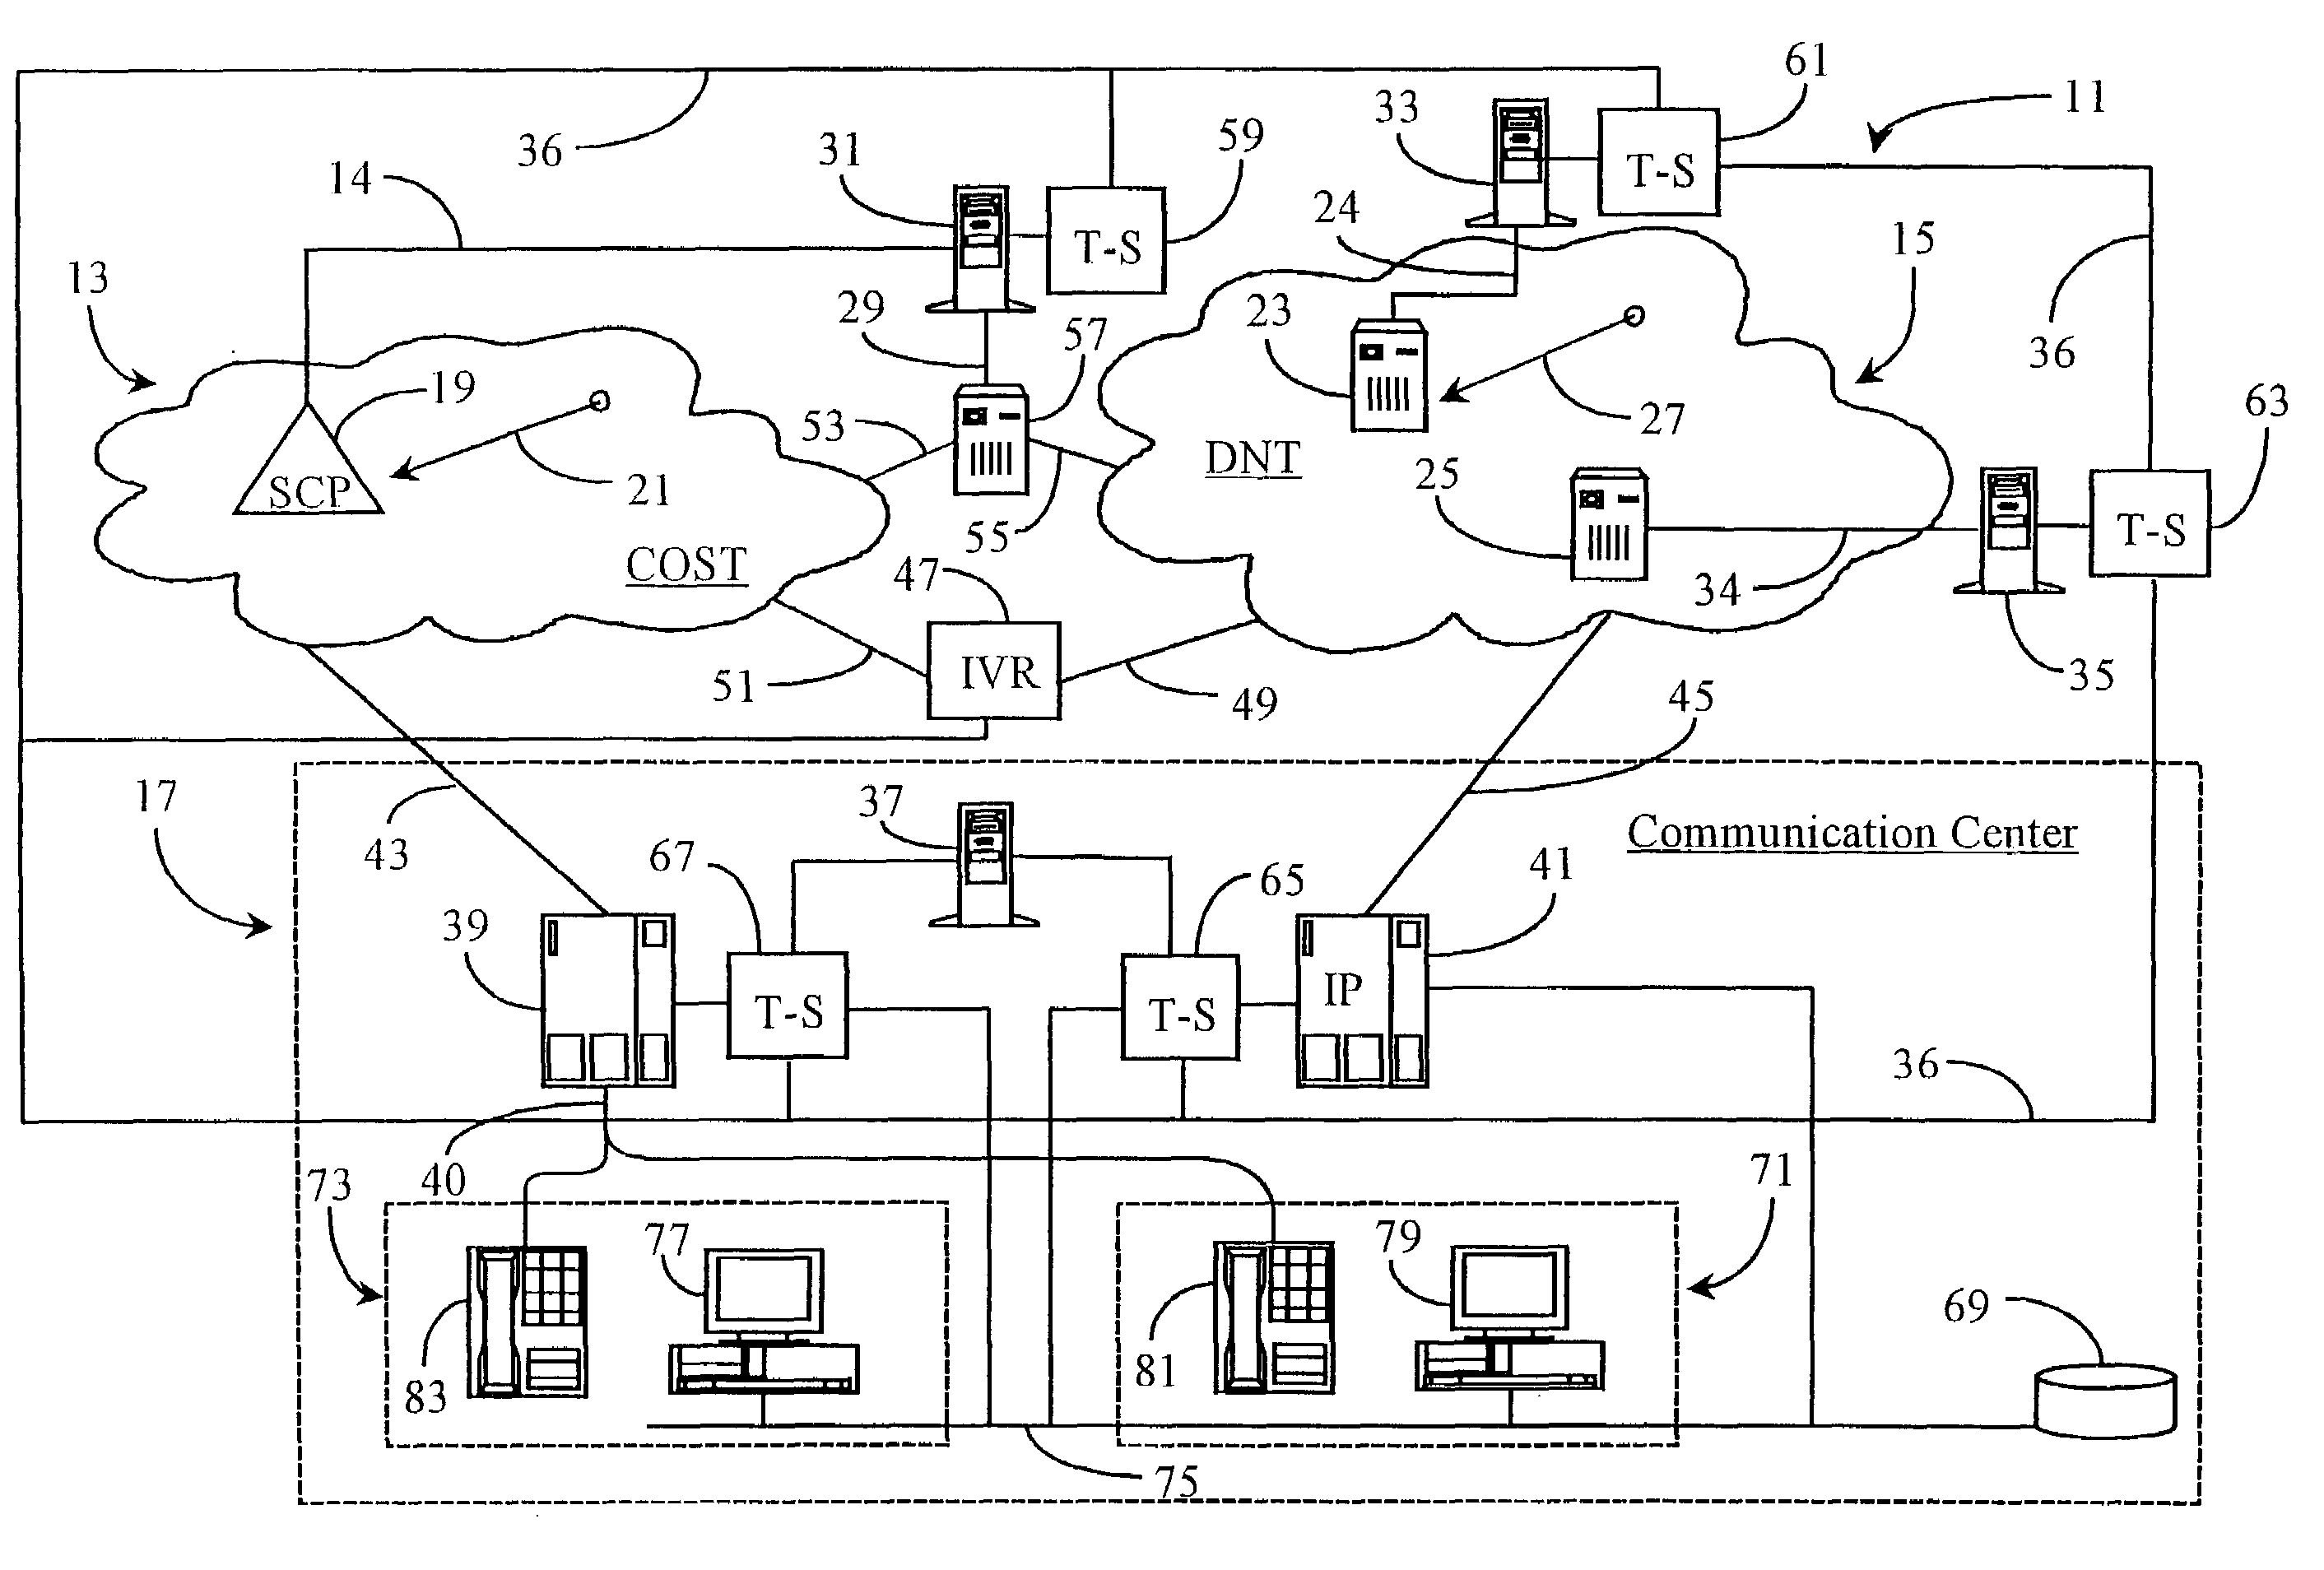 Dynamic translation between data network-based protocol in a data-packet-network and interactive voice response functions of a telephony network